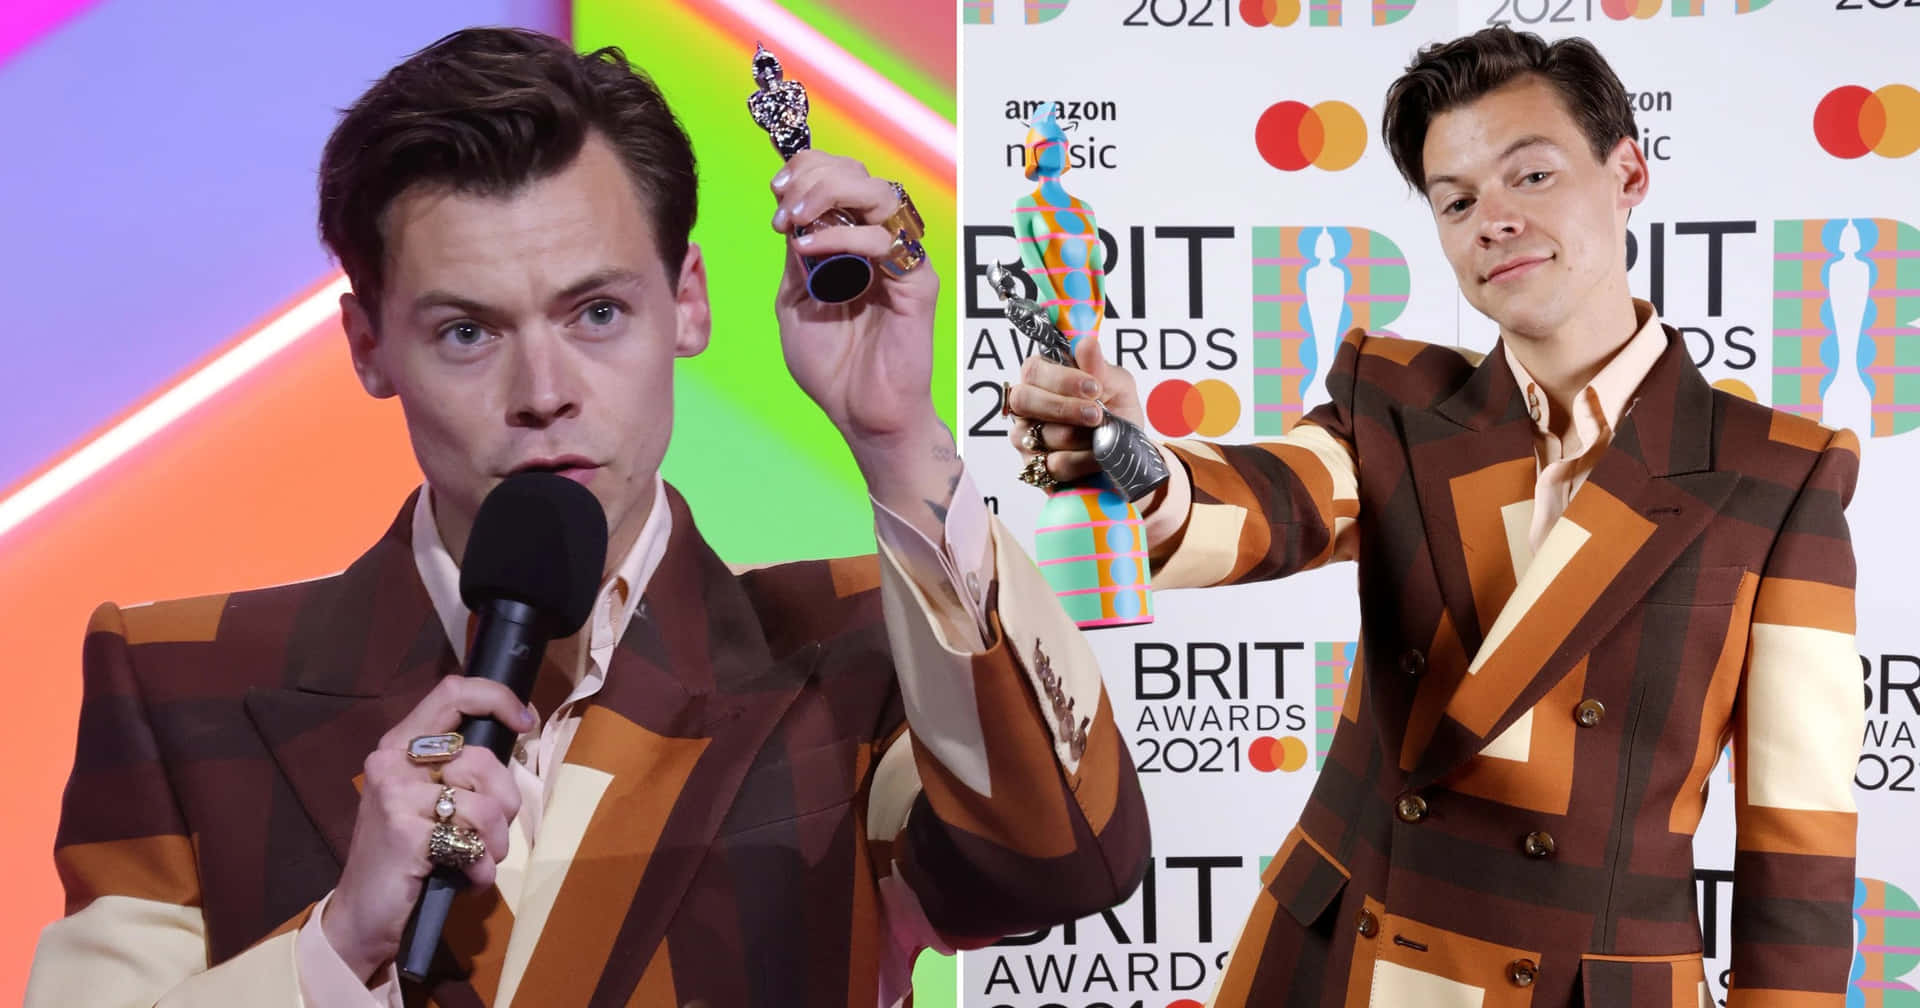 Harry Styles Dazzles as He Poses for 2021 Photo Shoot